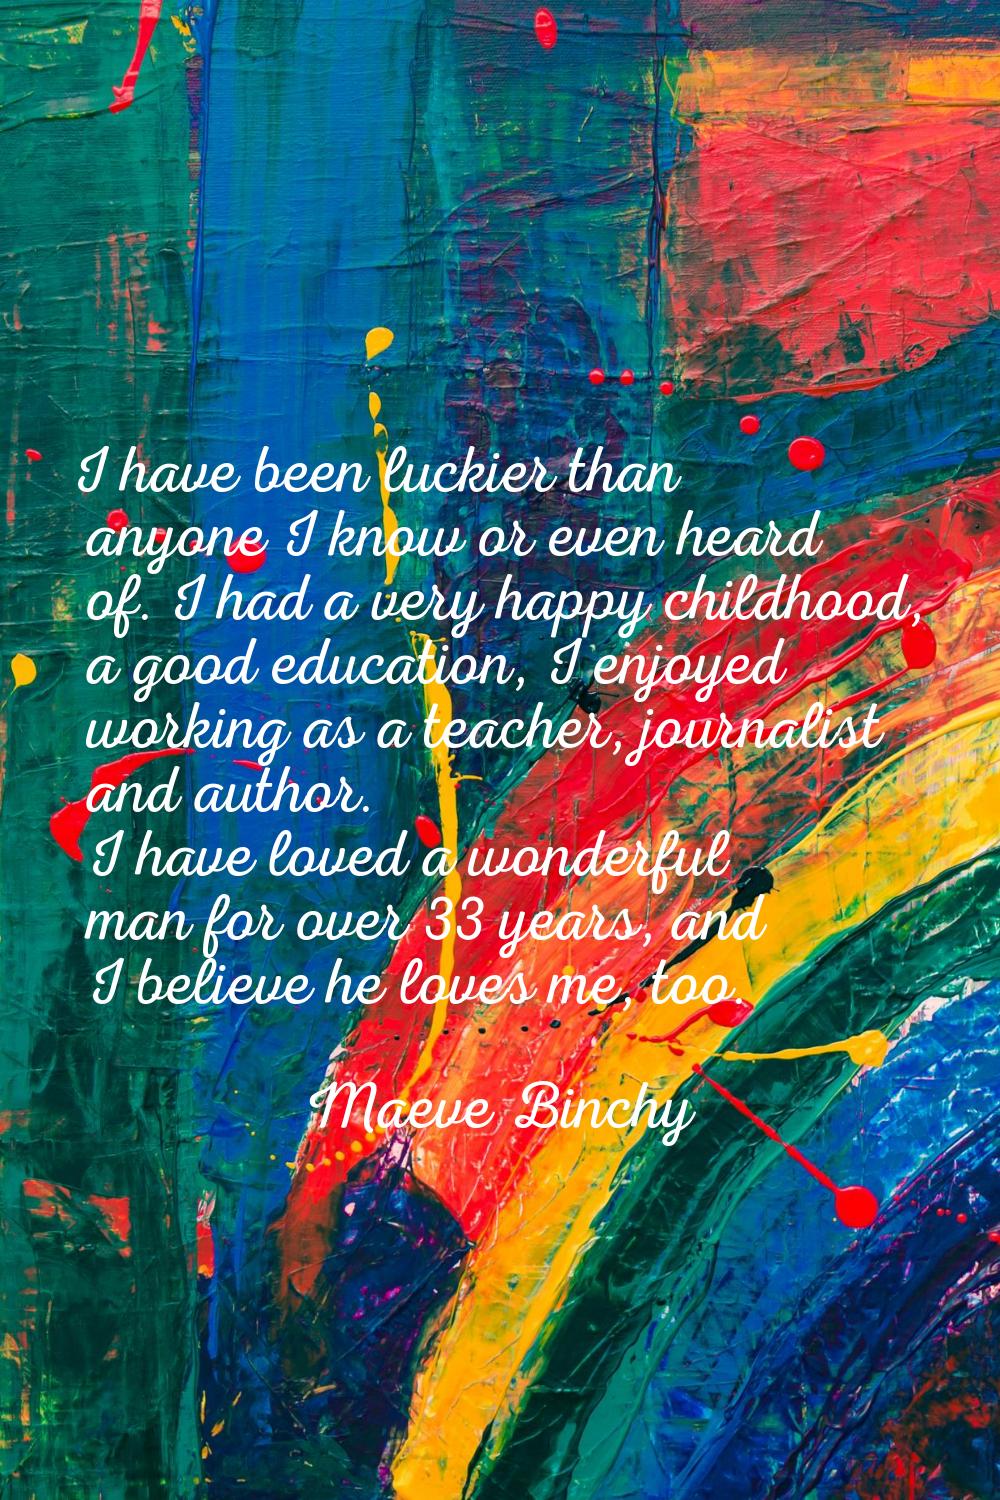 I have been luckier than anyone I know or even heard of. I had a very happy childhood, a good educa